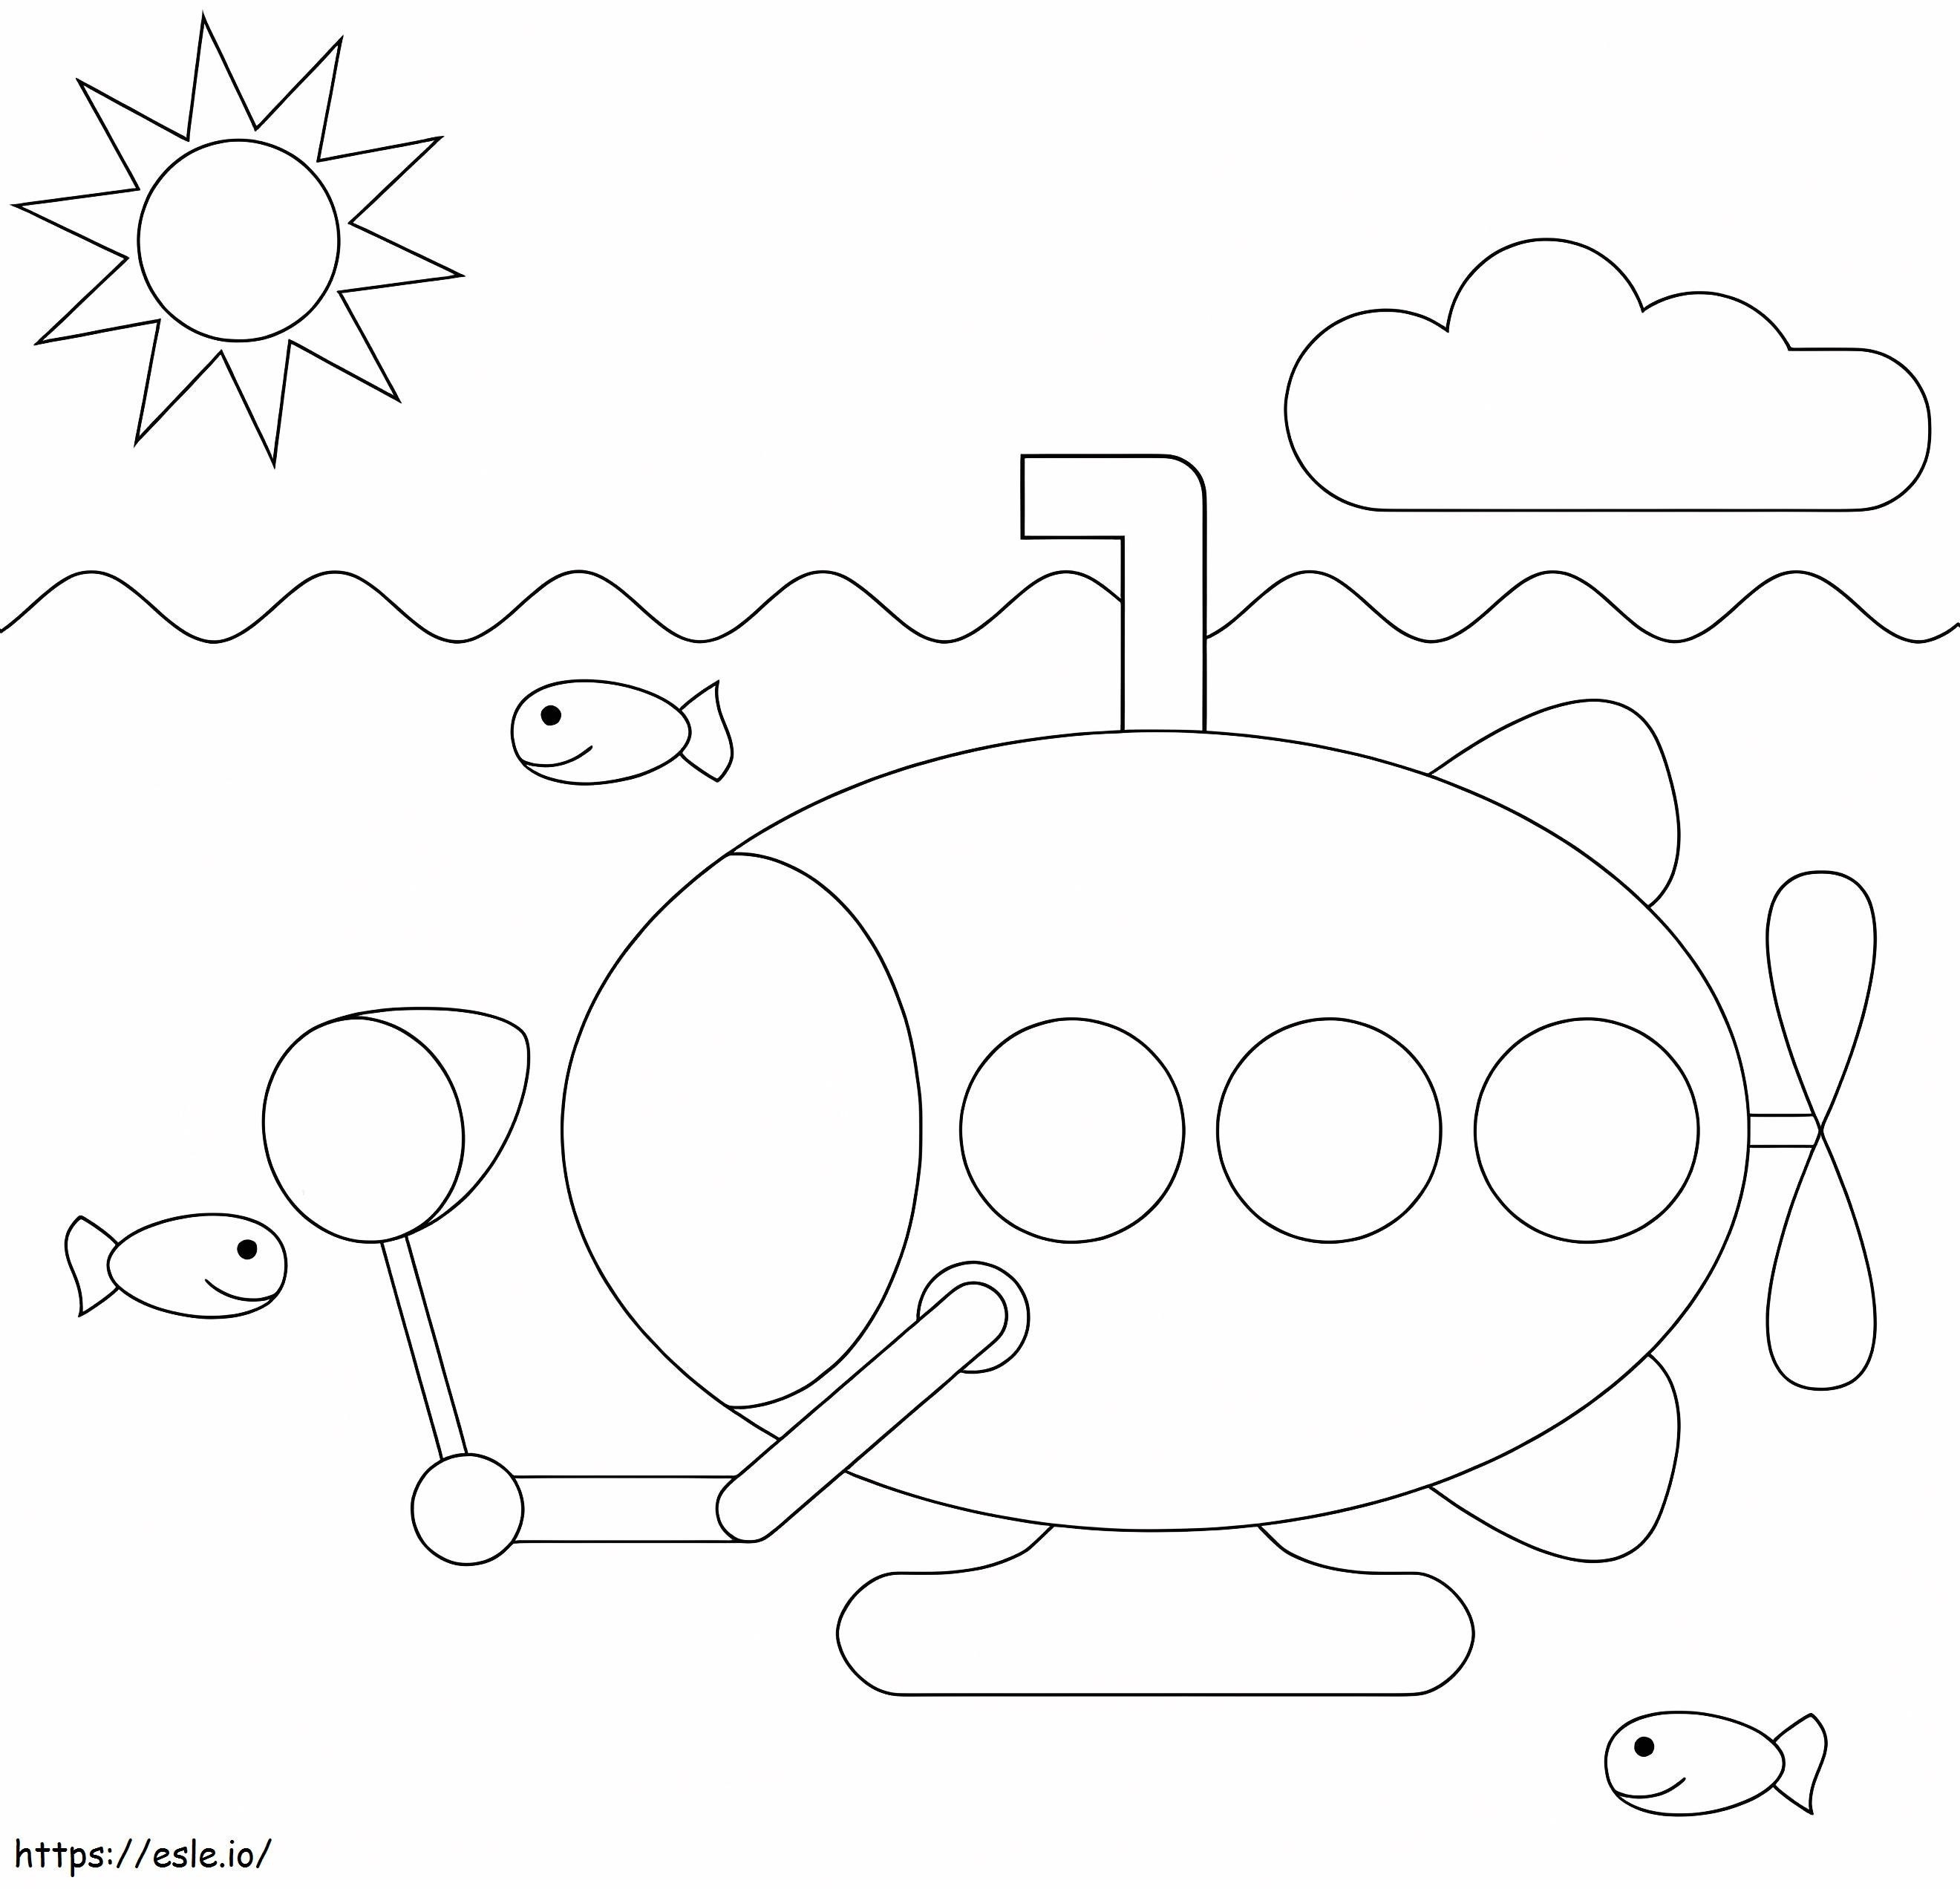 Easy Submarine For Children coloring page